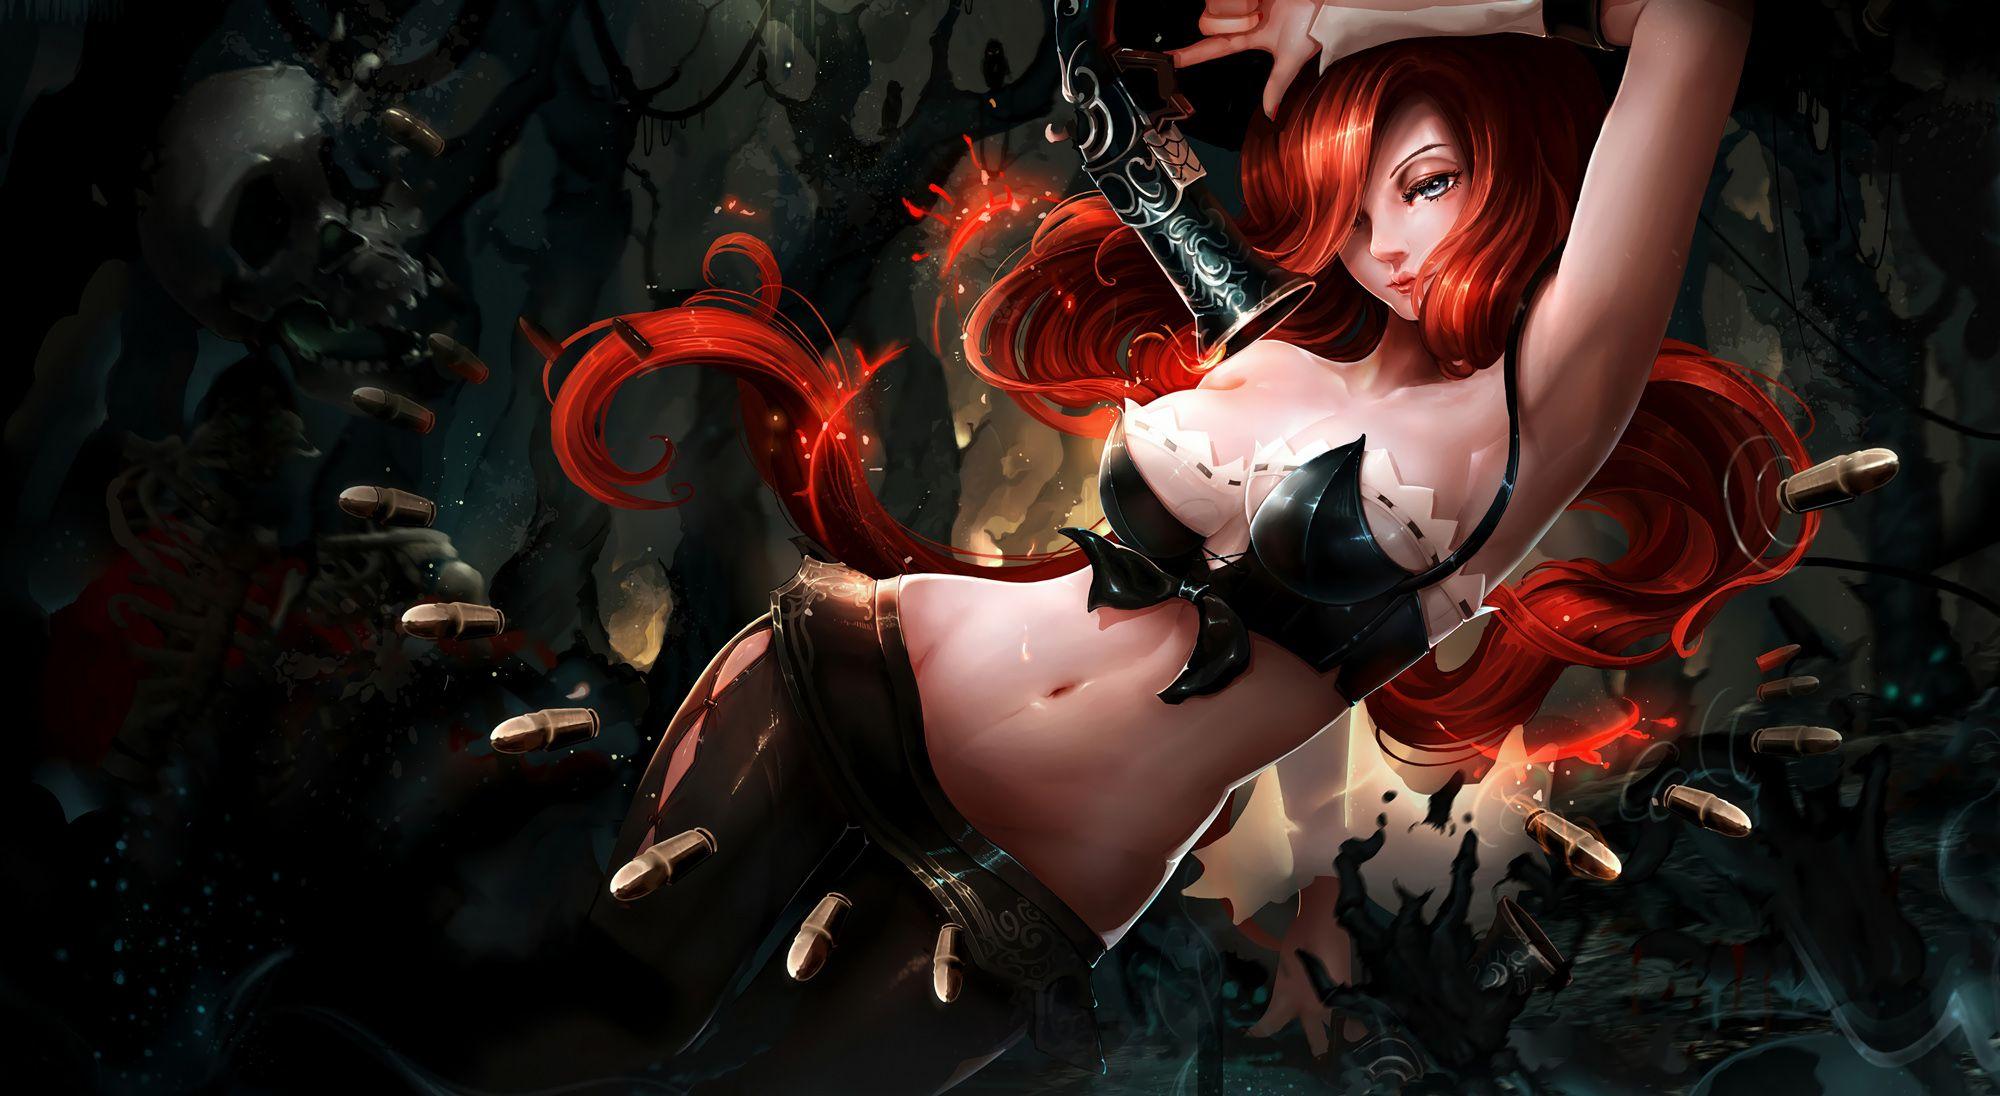 This pic of Miss Fortune